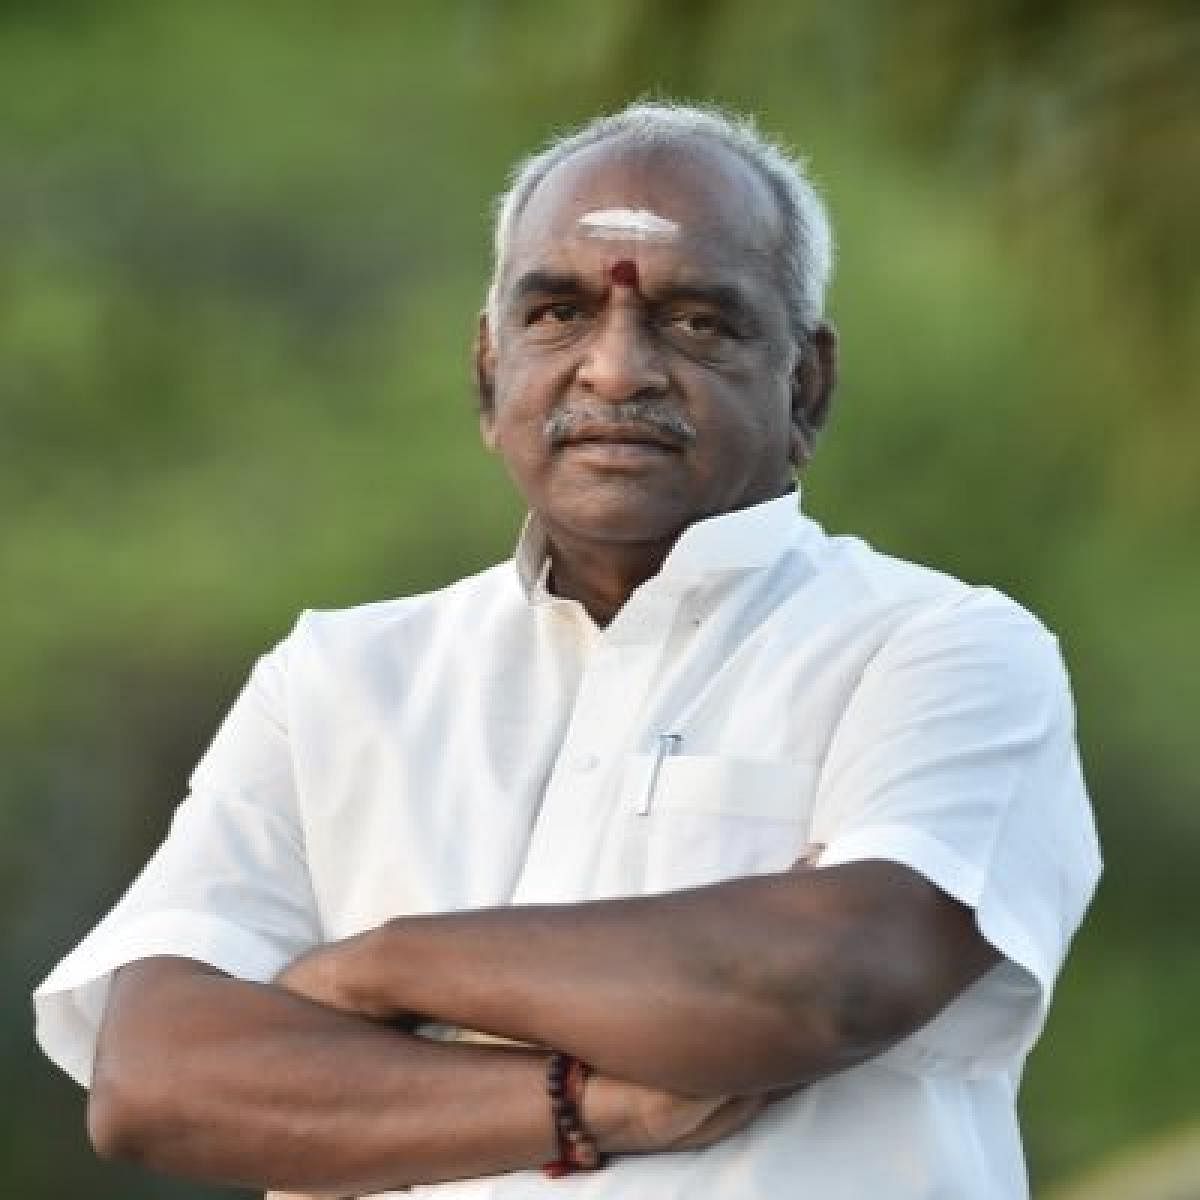 Tamils are ungrateful people: Former BJP minister